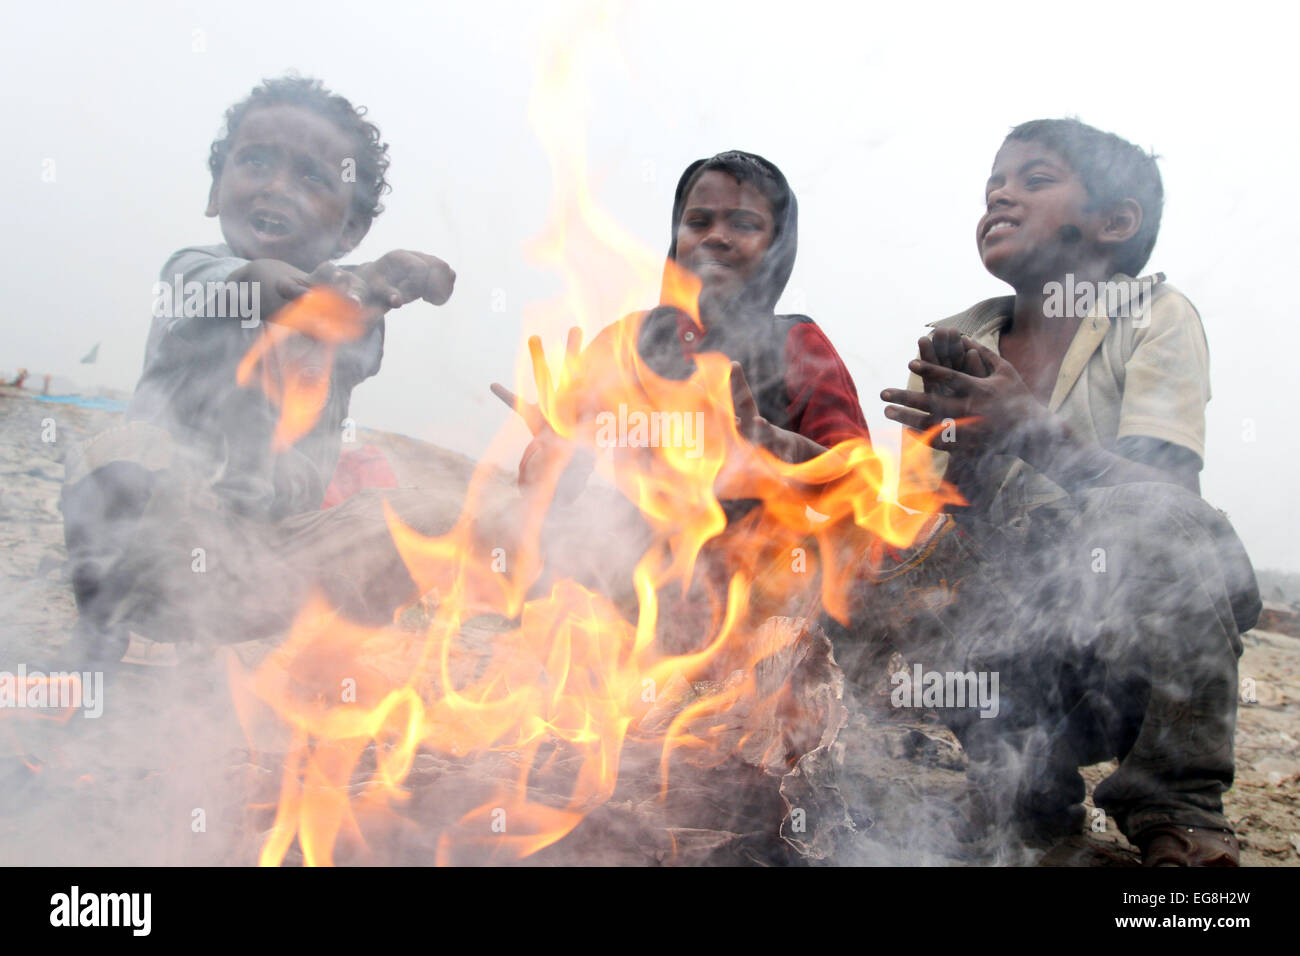 Homeless children create fire by using discarded wood or plastic to provide some warmth as winter temperatures d Stock Photo